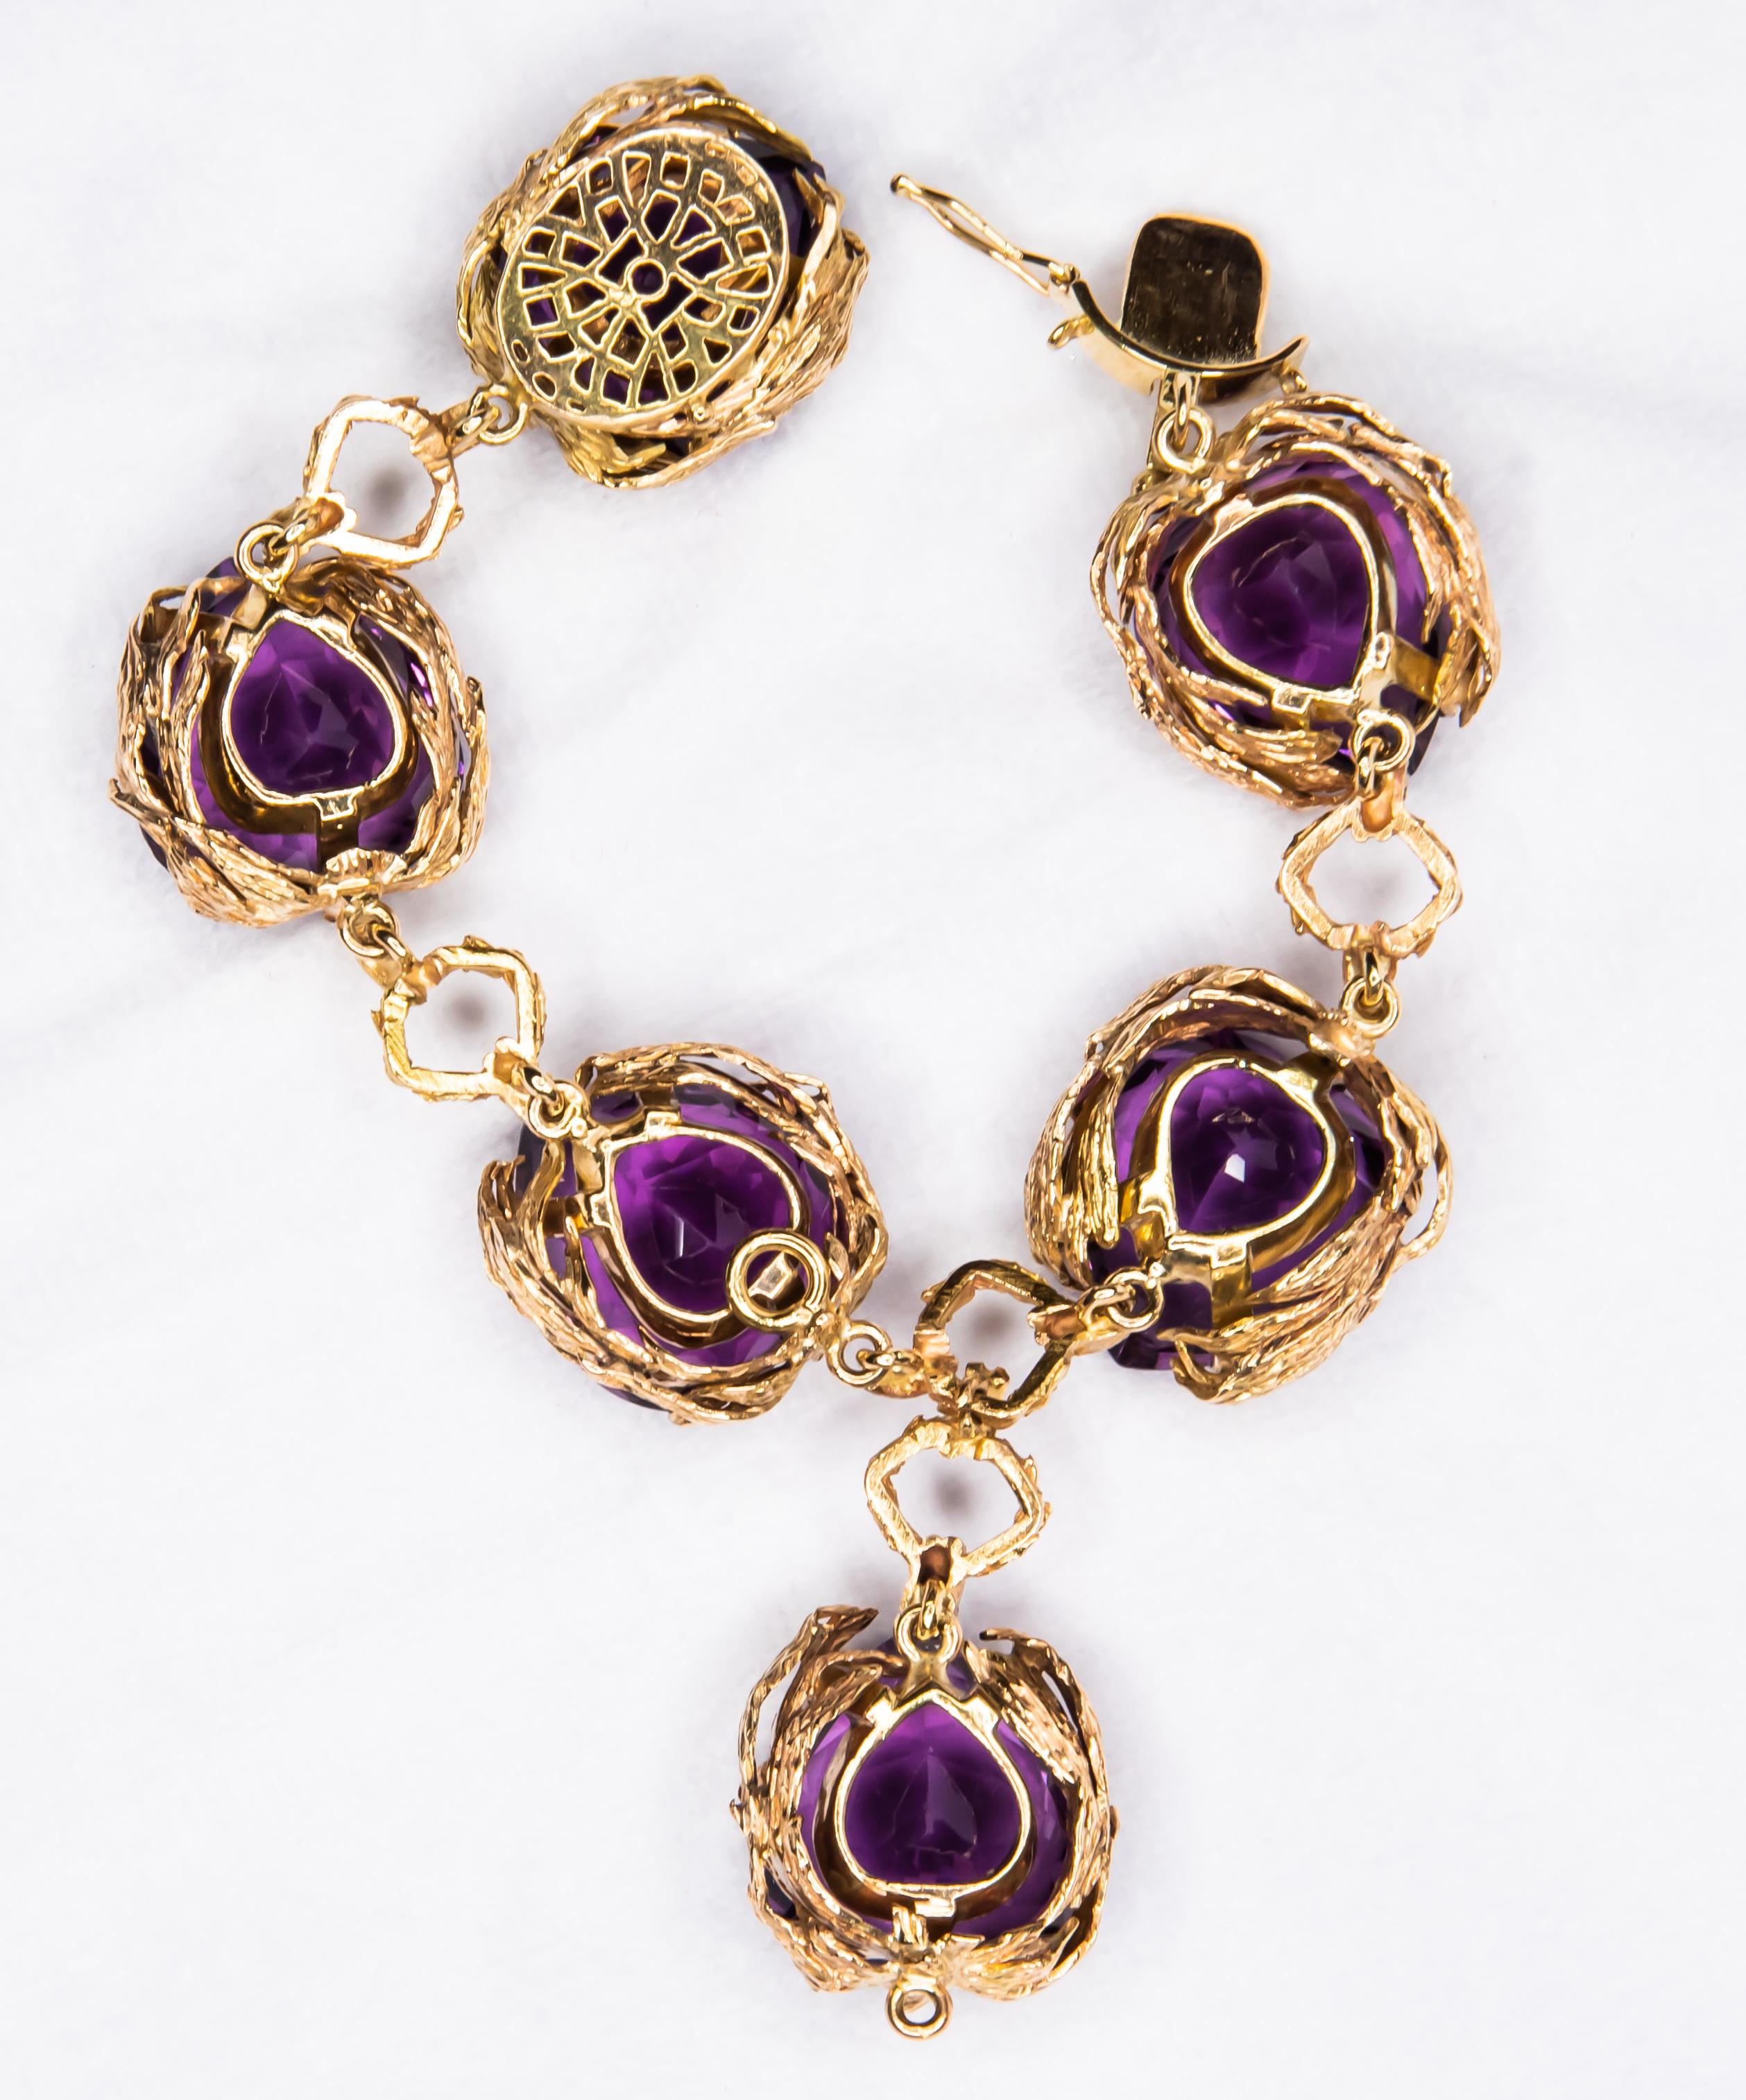 Artfully detailed bracelet crafted in 18 karat yellow gold.  Features 6 perfectly matched Amethysts in heart shapes.  Bracelet was shortened leaving 1 Amethyst section dangling at the center.  It can easily be added back for length if needed.  All 6